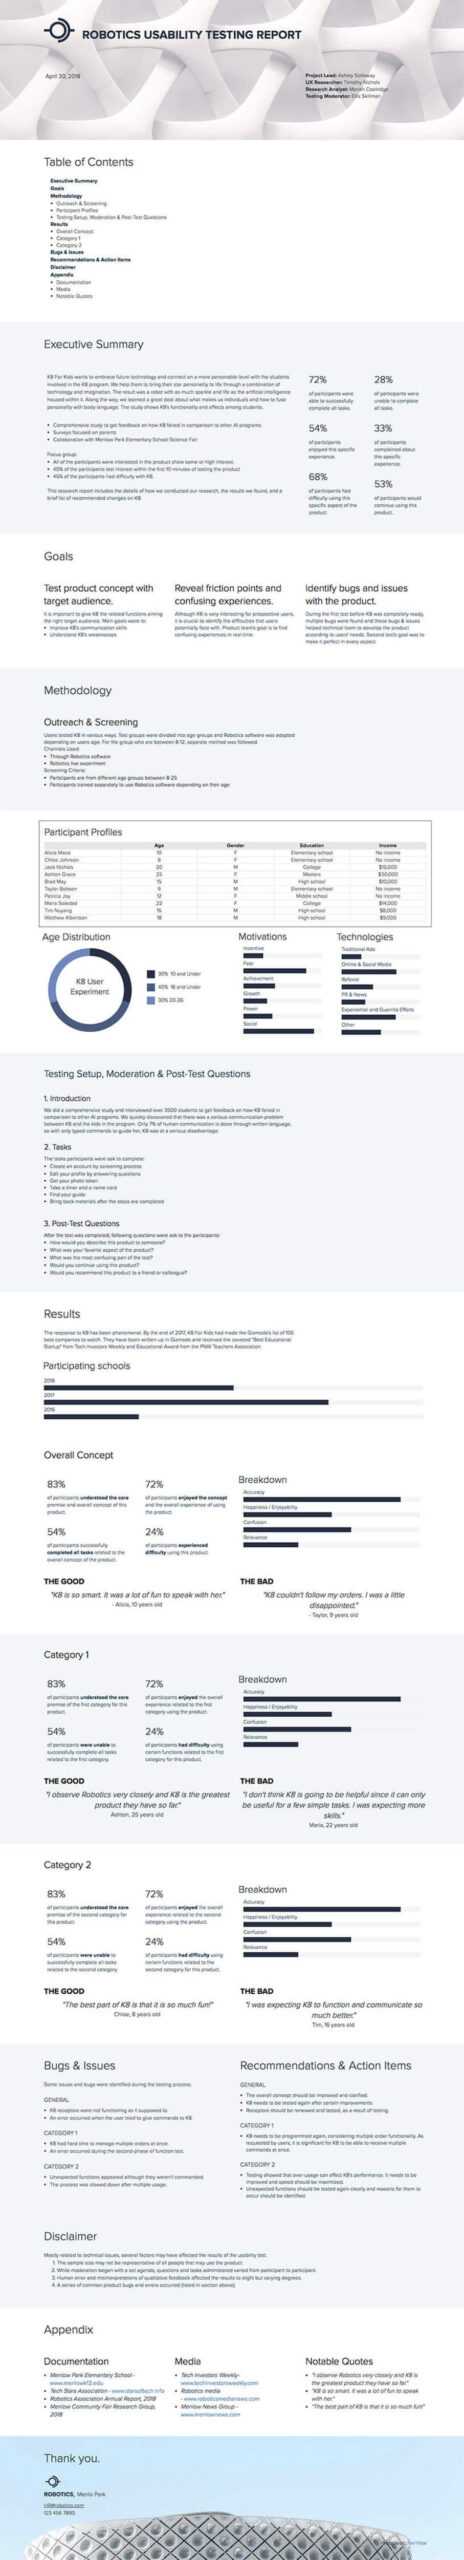 How To Write A Usability Testing Report (With Samples) | Xtensio In Usability Test Report Template